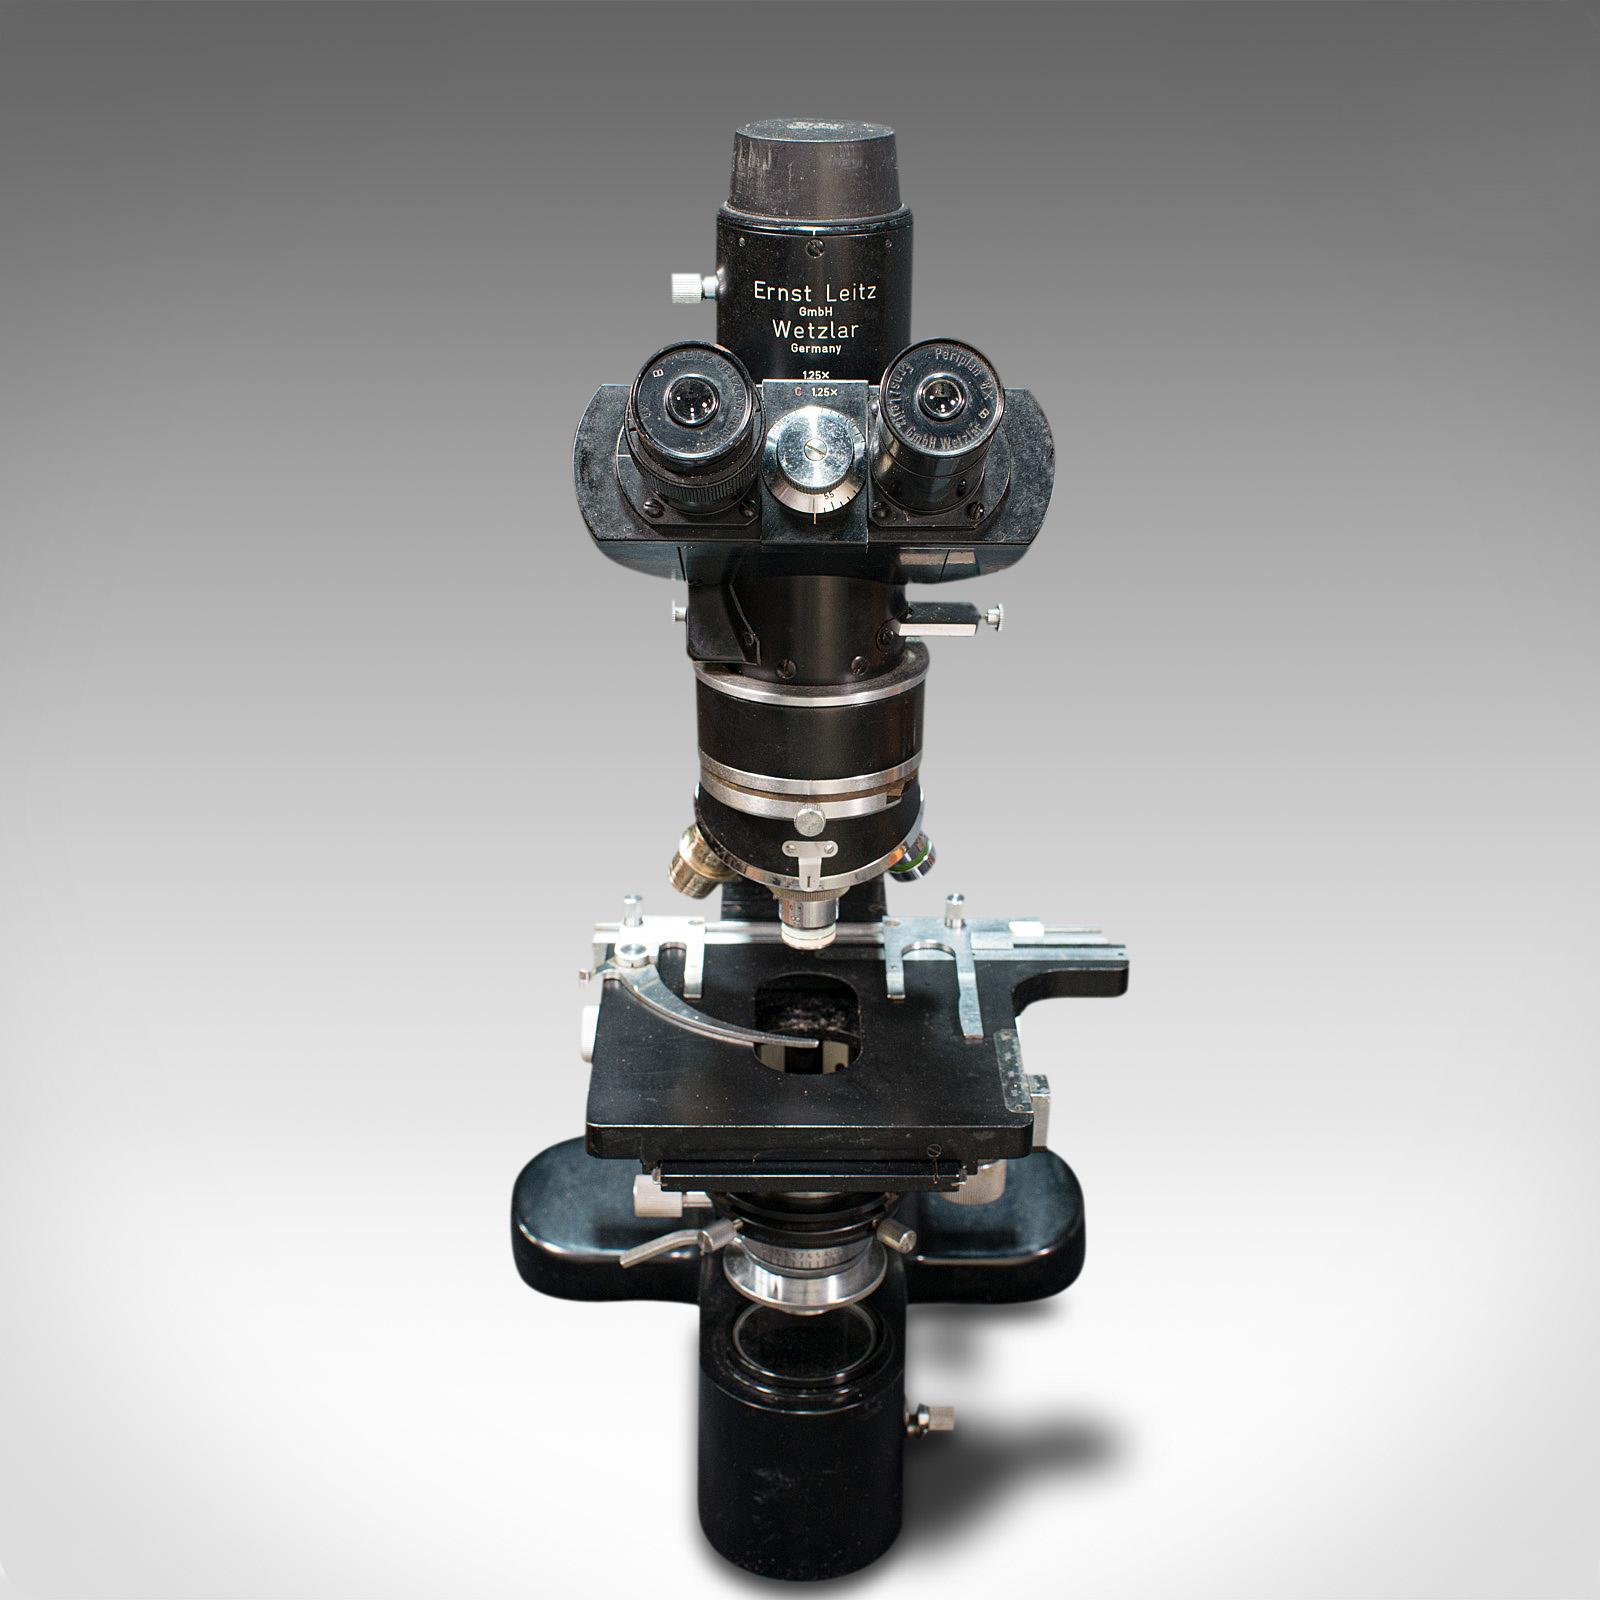 This is a vintage Ernst Leitz Microscope. A German, enamel coated alloy Dialux scientific instrument, dating to the mid 20th century, circa 1960.

Built to a standard not seen in the modern era and with myriad accessories
Displaying a desirable